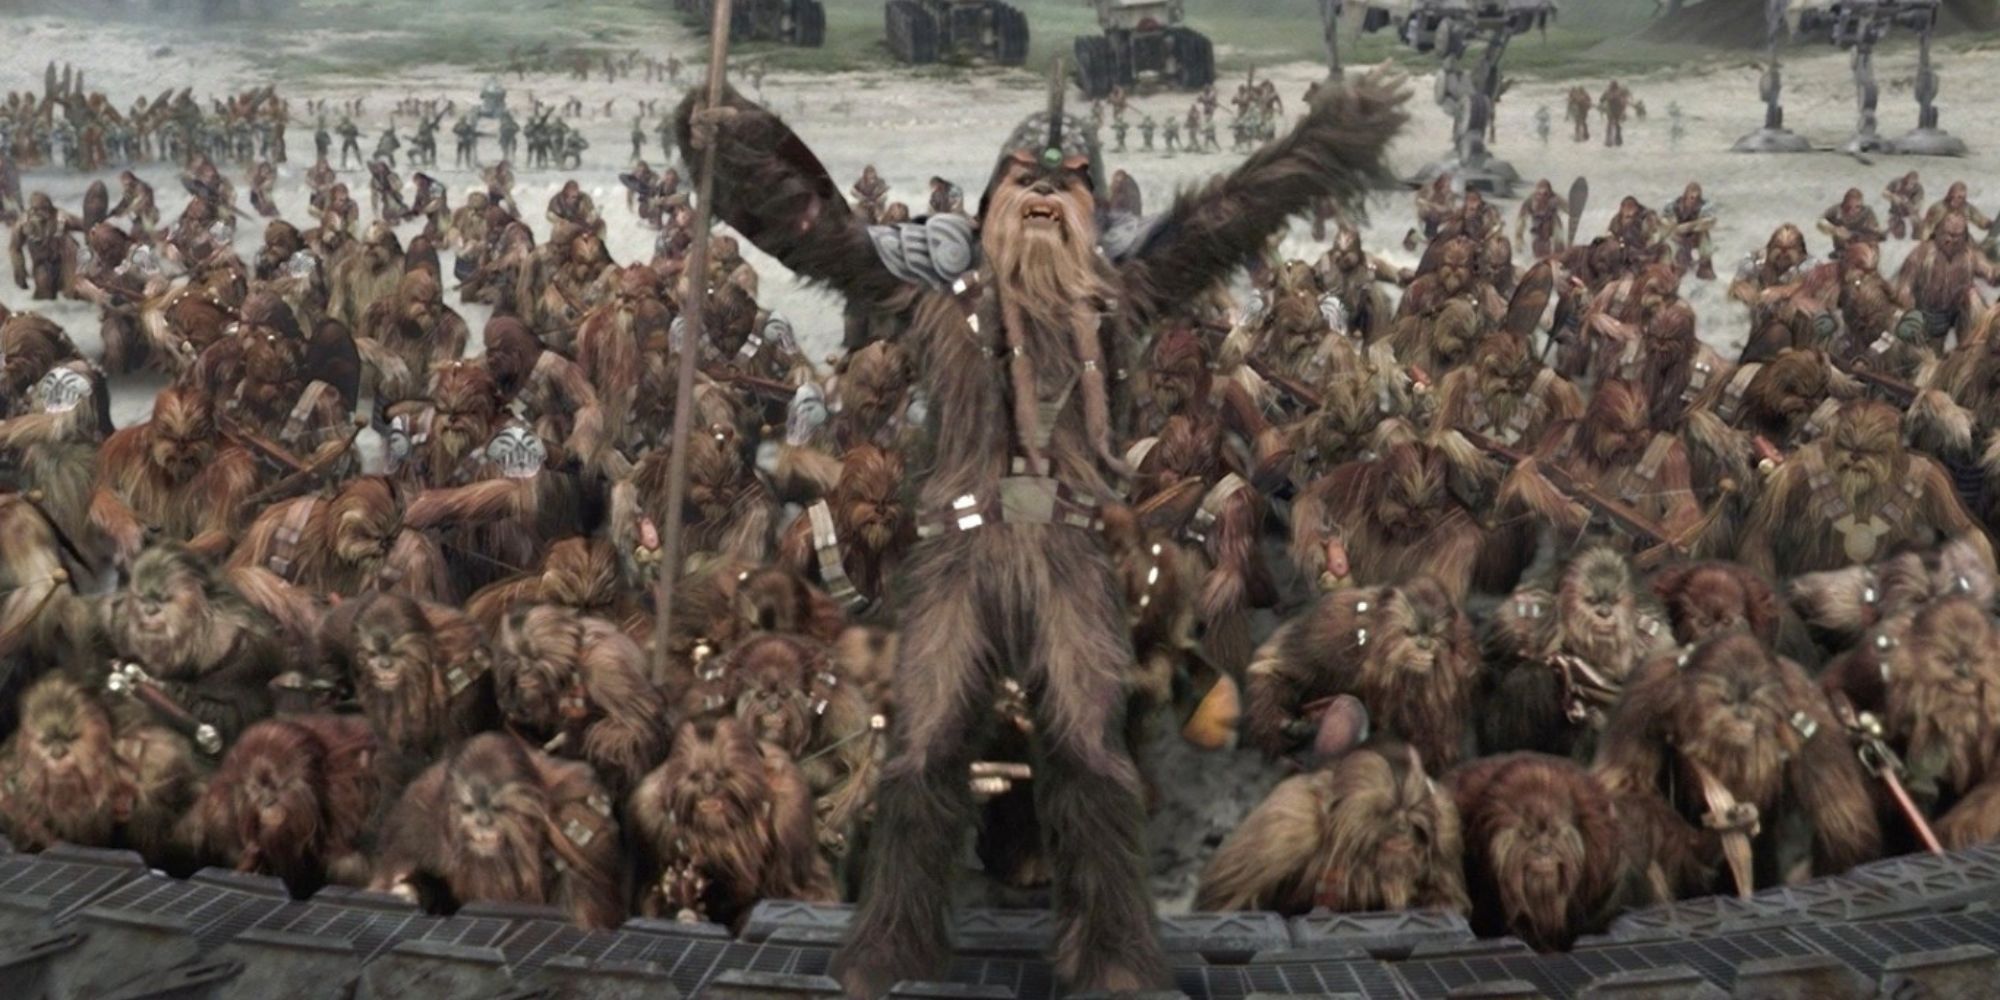 The wookie leader assembled his troops